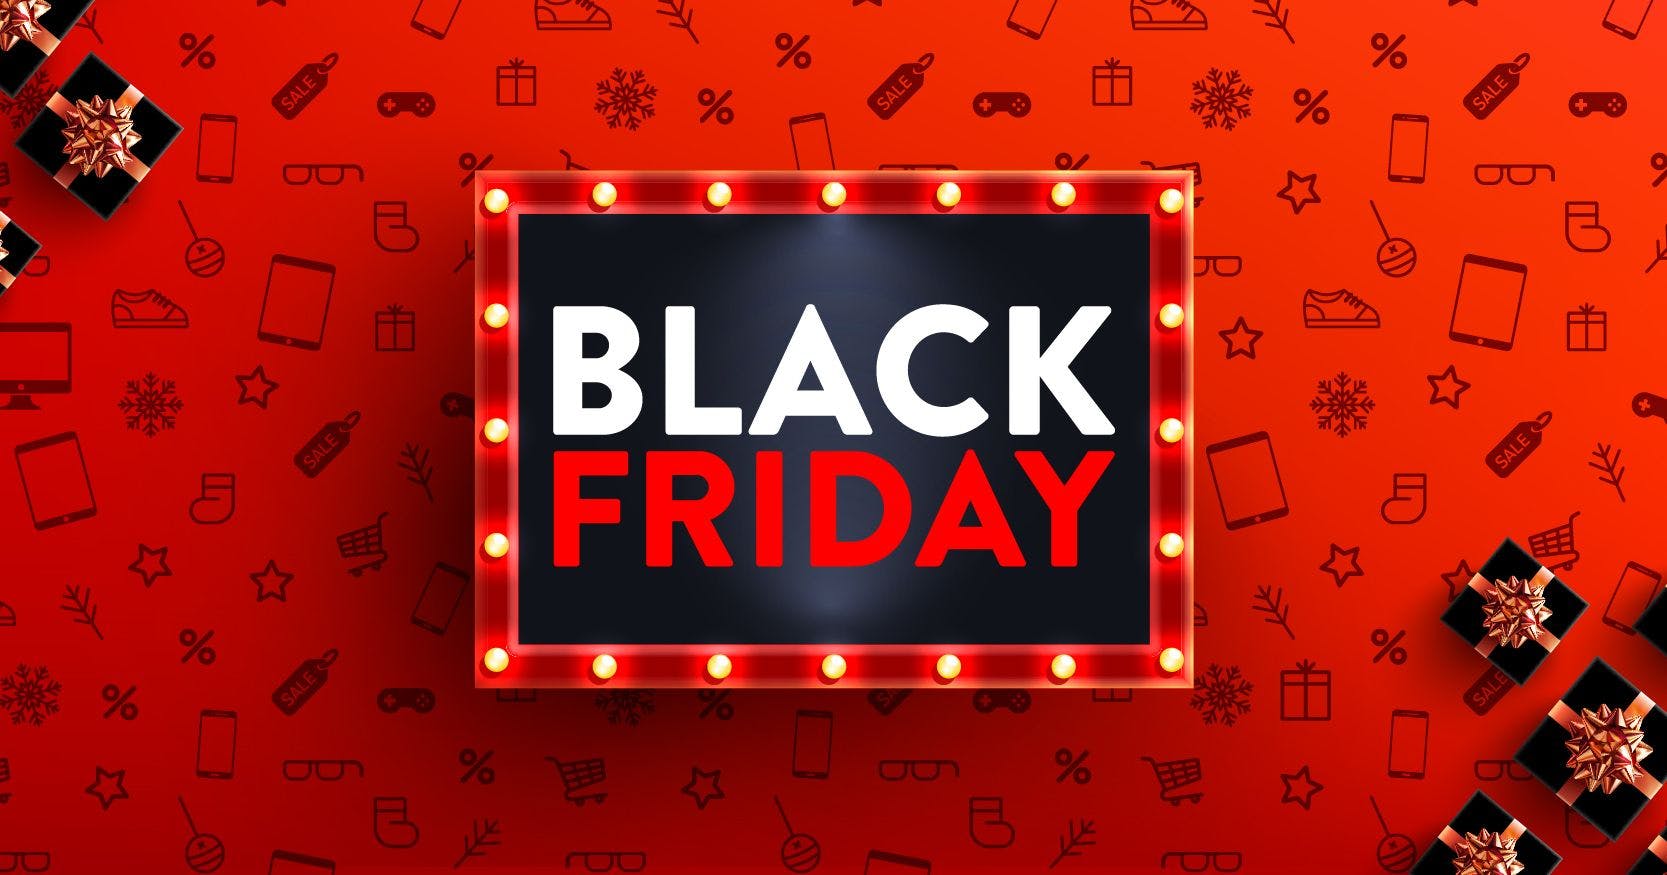 featured image - Black Friday 2021: Golden Sales Opportunity for eCommerce Stores